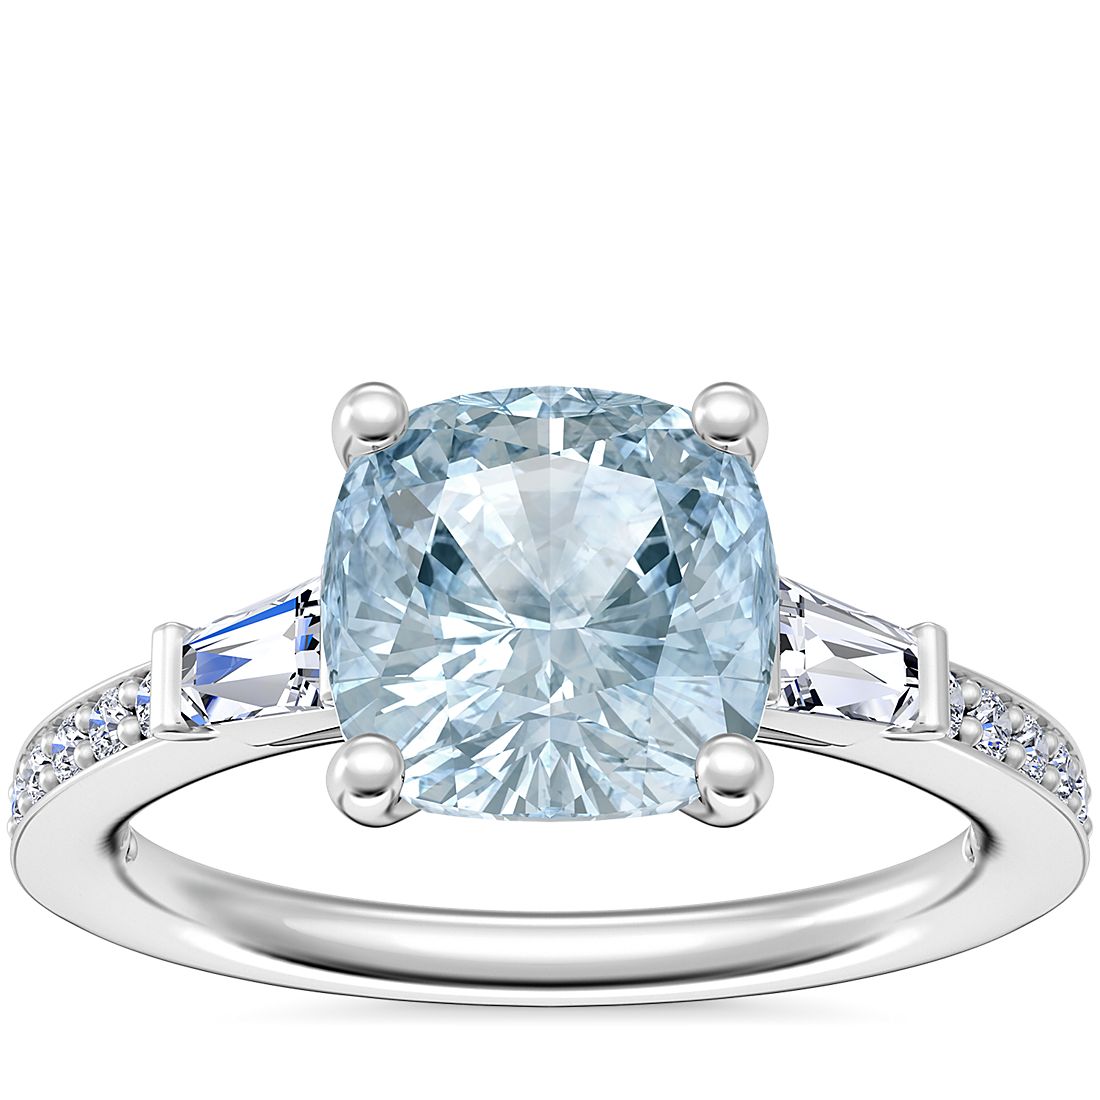 Tapered Baguette Diamond Cathedral Engagement Ring with Cushion Aquamarine in Platinum (8mm)